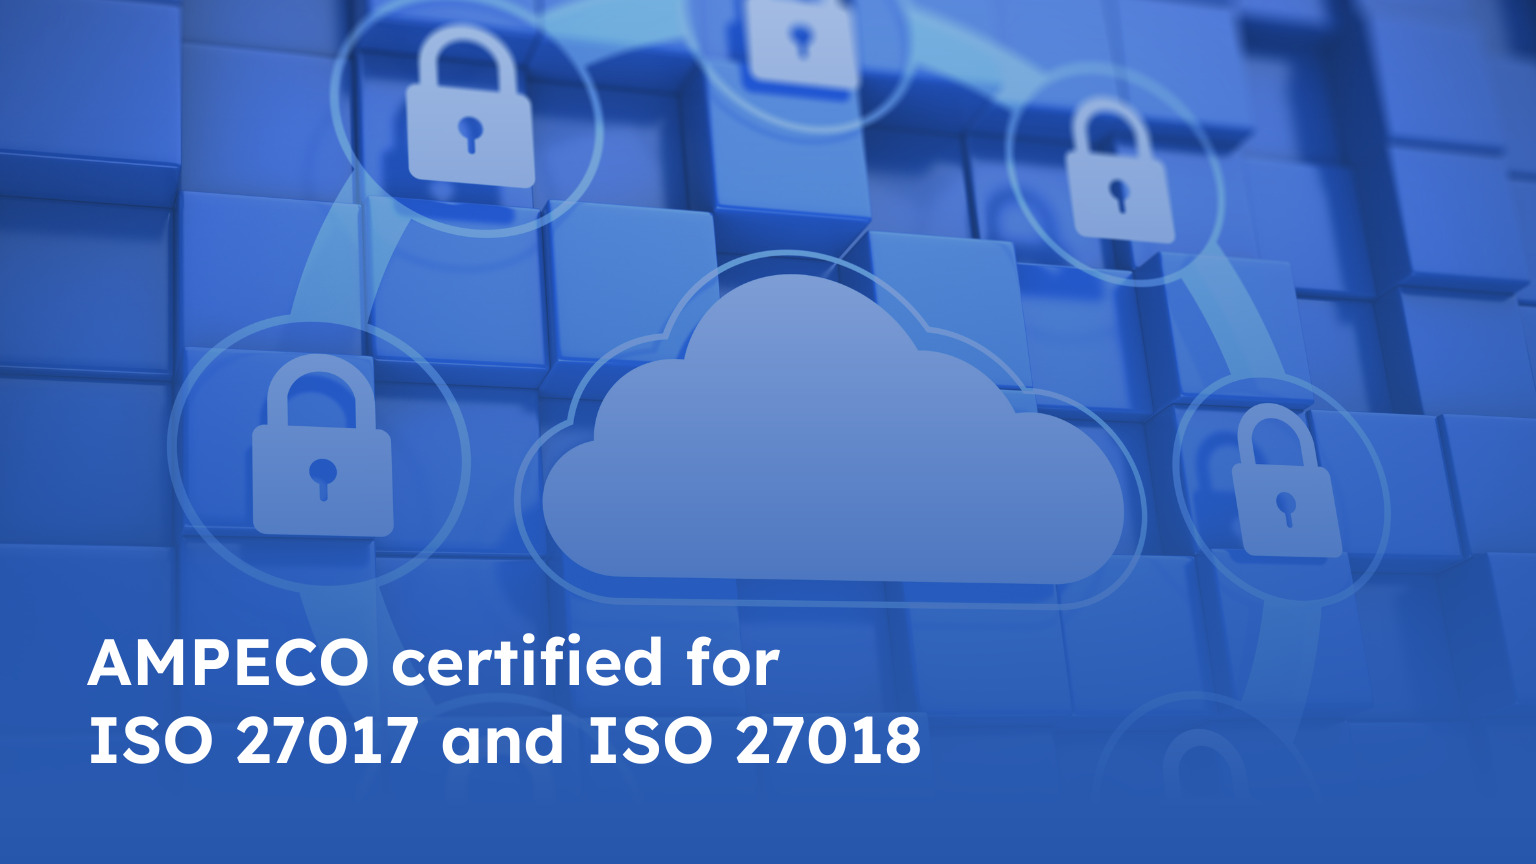 AMPECO achieves ISO 27017 and ISO 27018 certifications - We are pleased to announce that we have been granted certifications for ISO 27017 and ISO 27018,  globally-respected information security standards developed by the International Organization for Standardization (ISO). AMPECO was previously awarded the ISO 27001 certification in 2021. These two additional certifications highlight the company's ongoing commitment to providing its customers with the gold standard in data security and privacy.